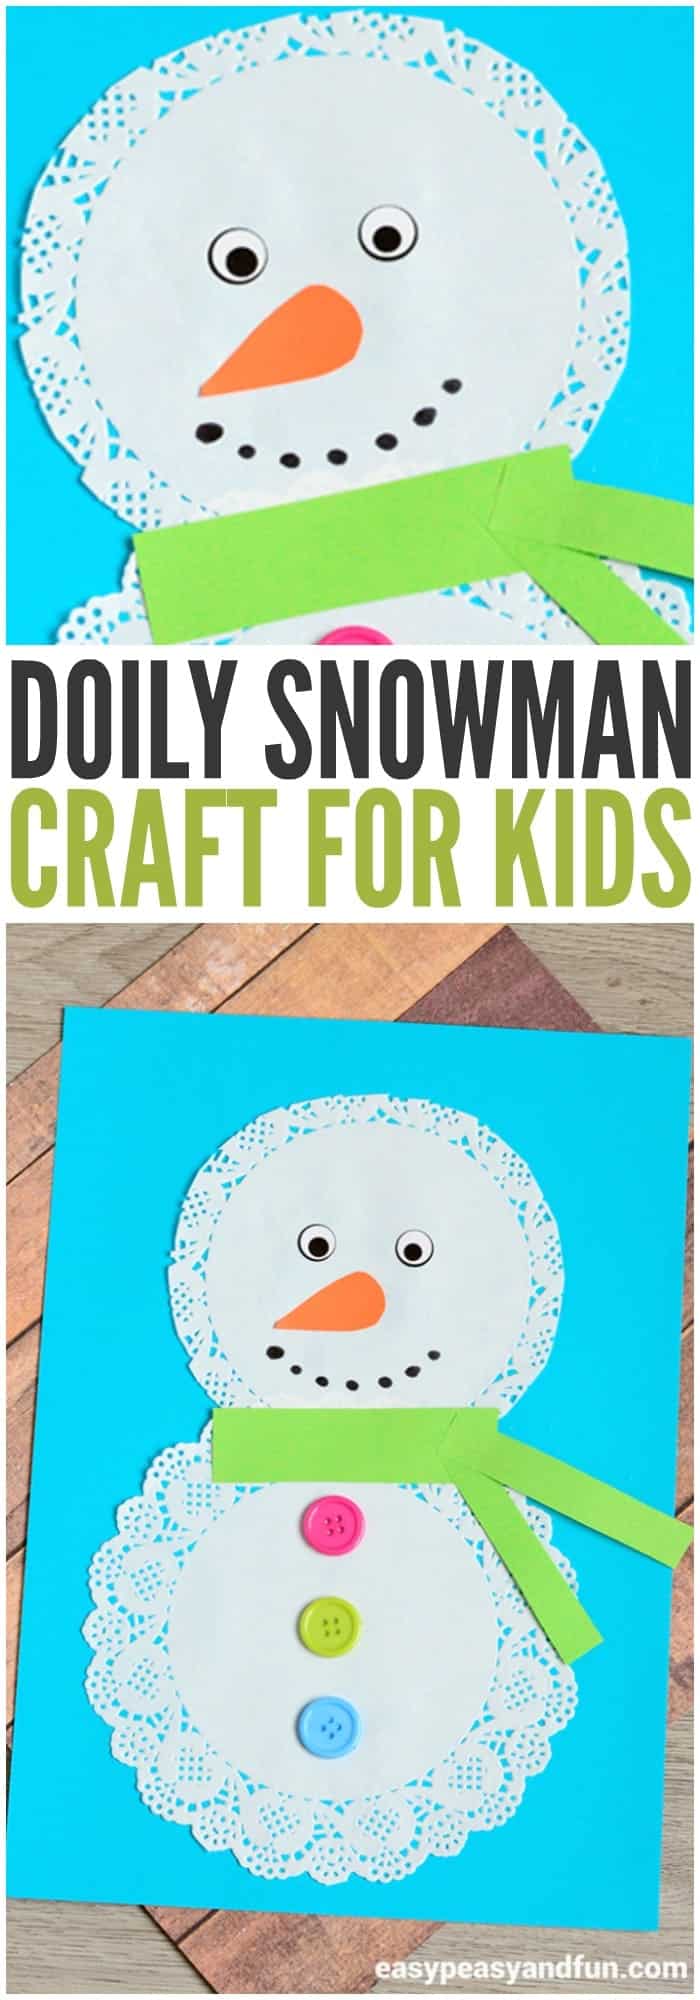 This winter keep your girls busy with this amazing list of 25 winter activities for girls of all ages--includes crafts, games, activities and more